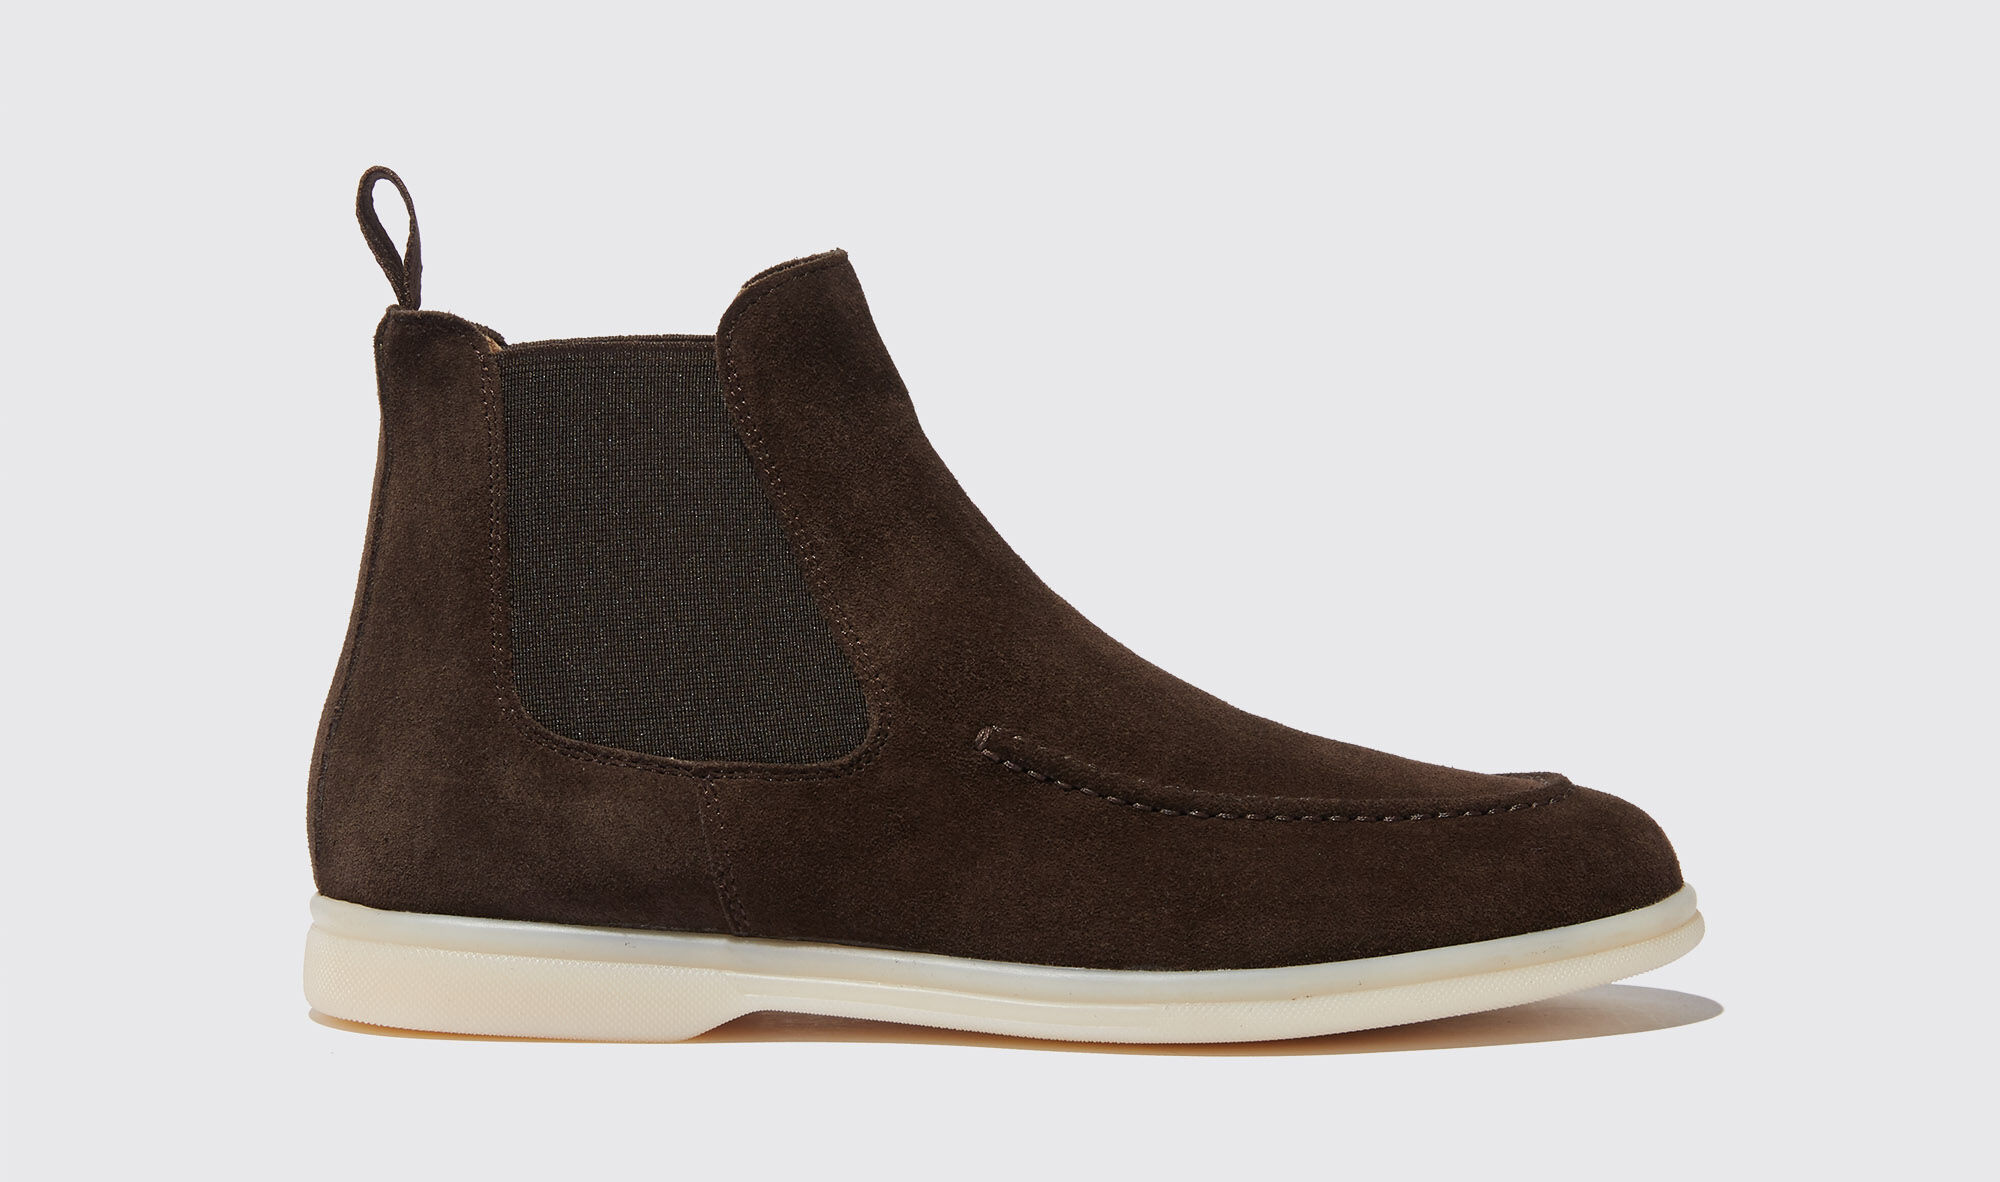 Scarosso Eugenia Moro Scamosciata - Donna Chelsea Boots Brown - Suede Leather 36